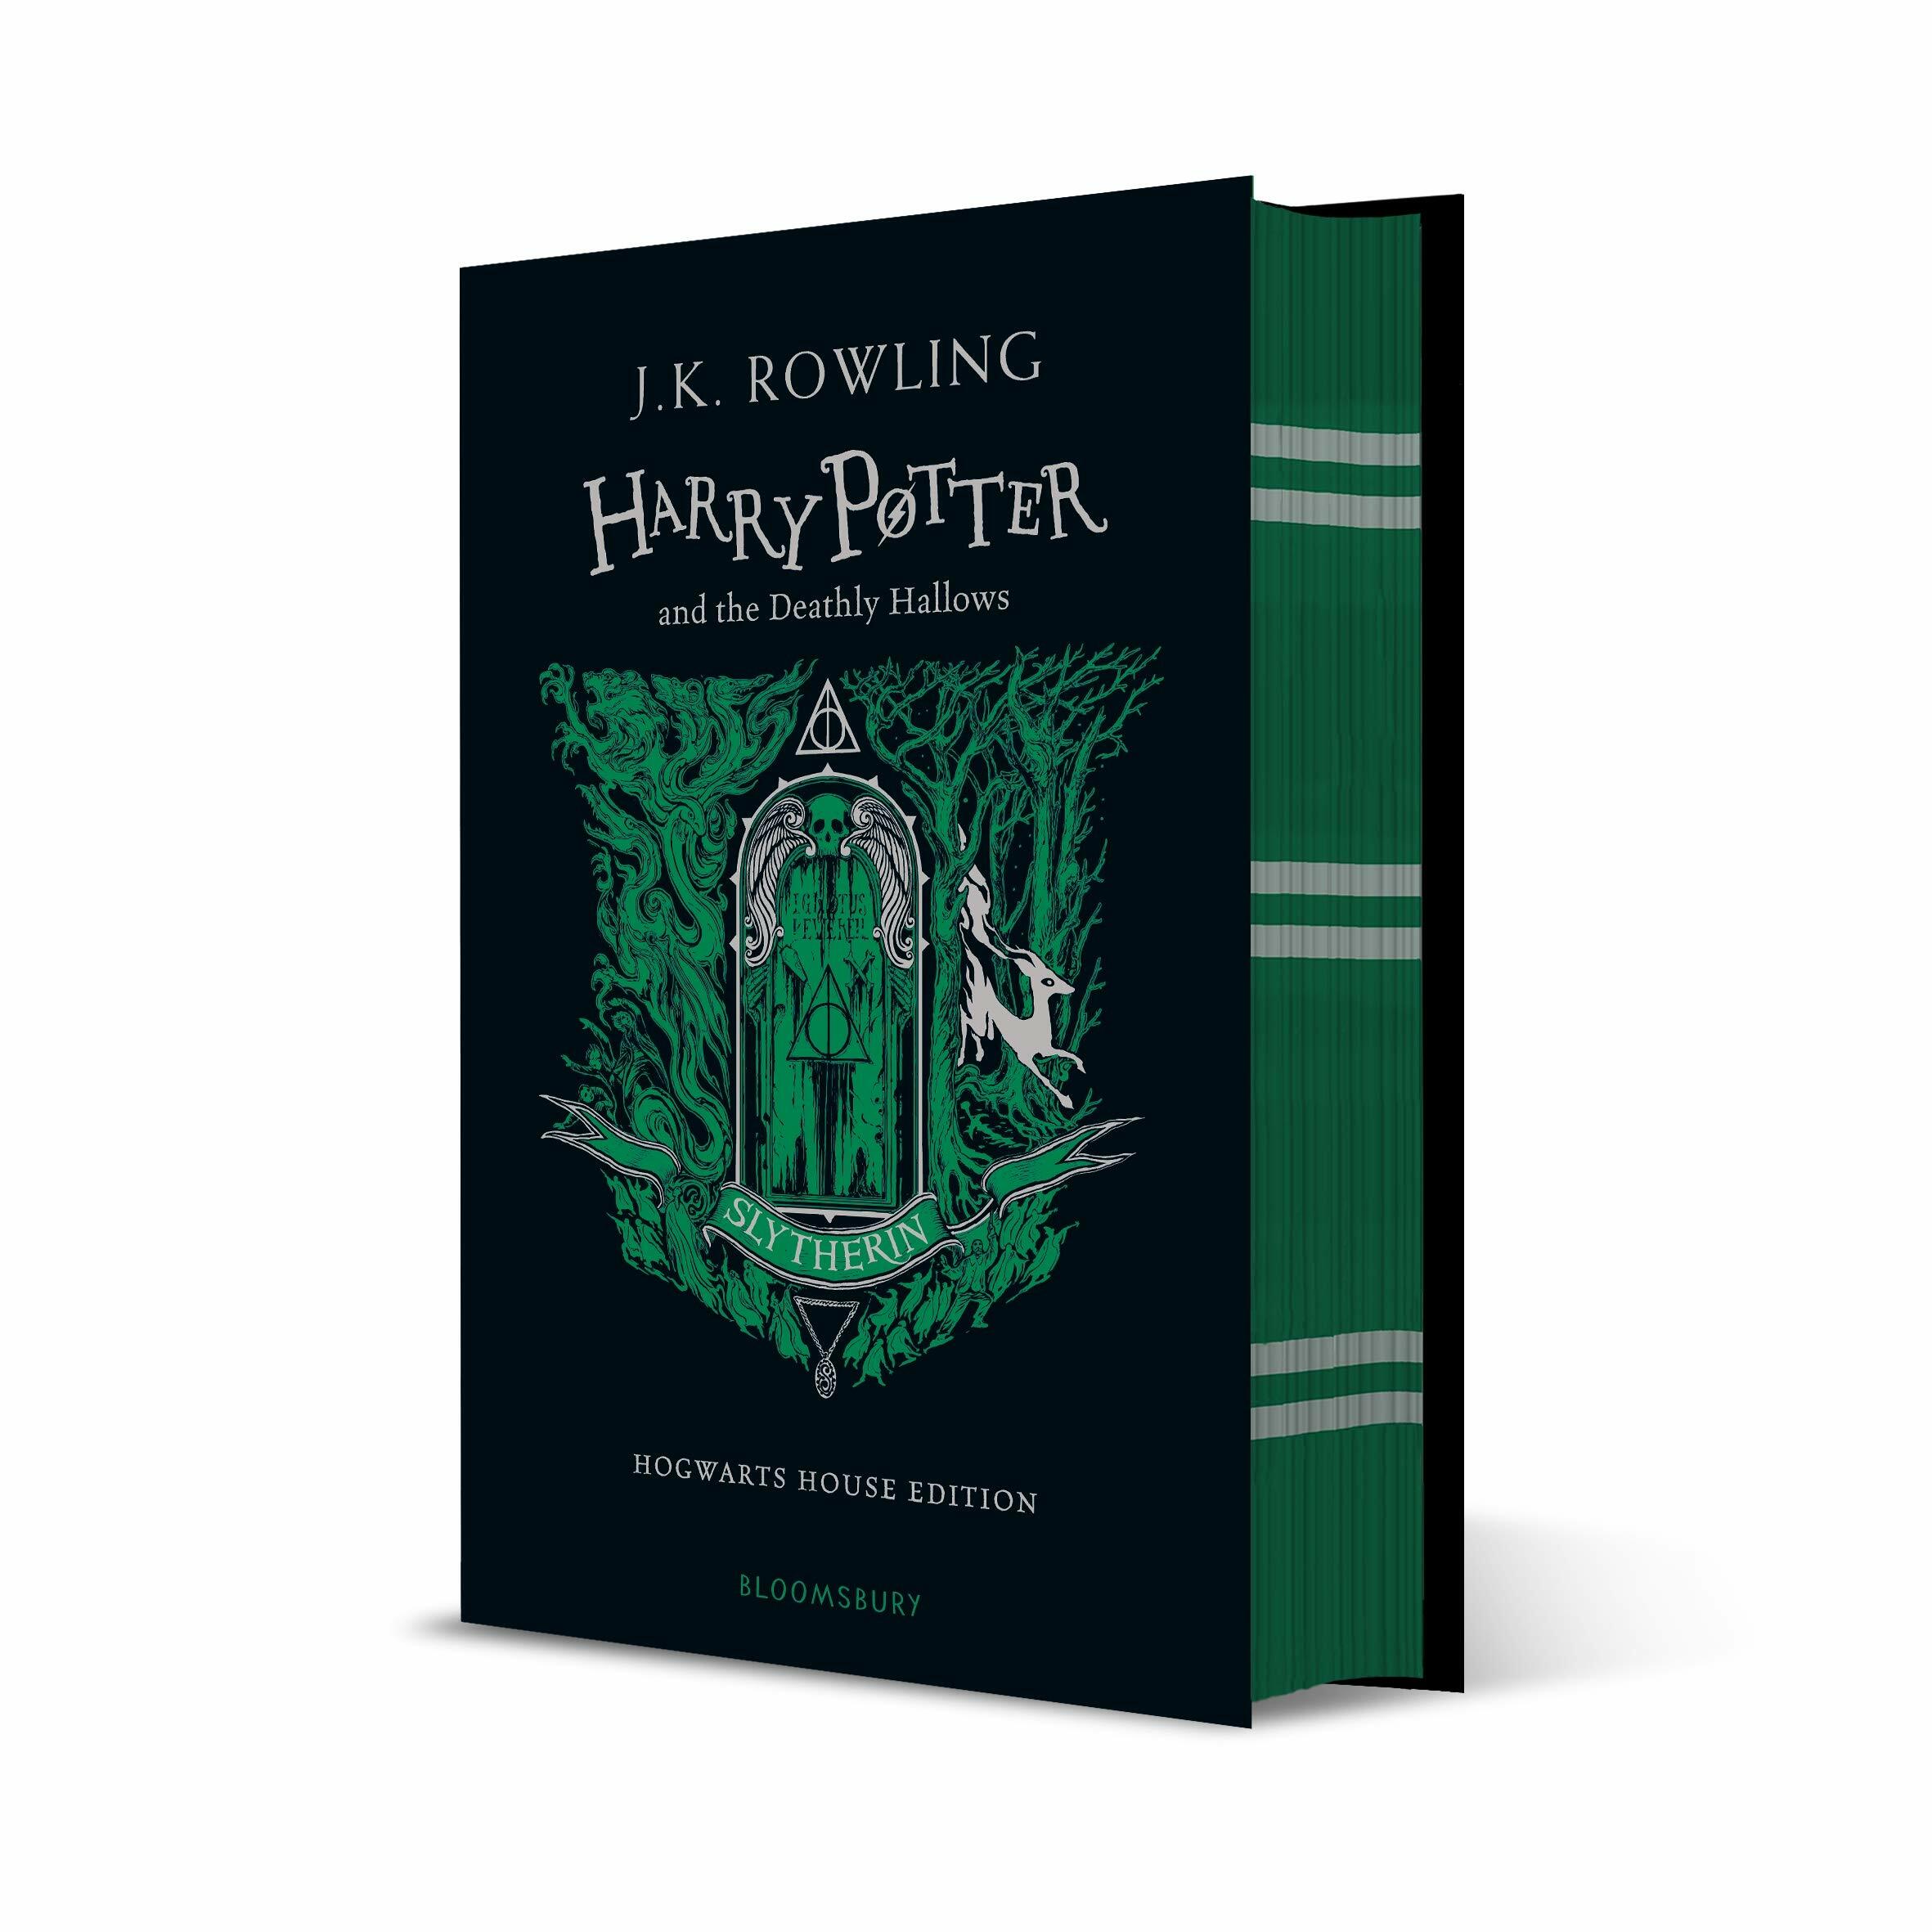 Harry Potter and the Deathly Hallows - Slytherin Edition (Hardcover)